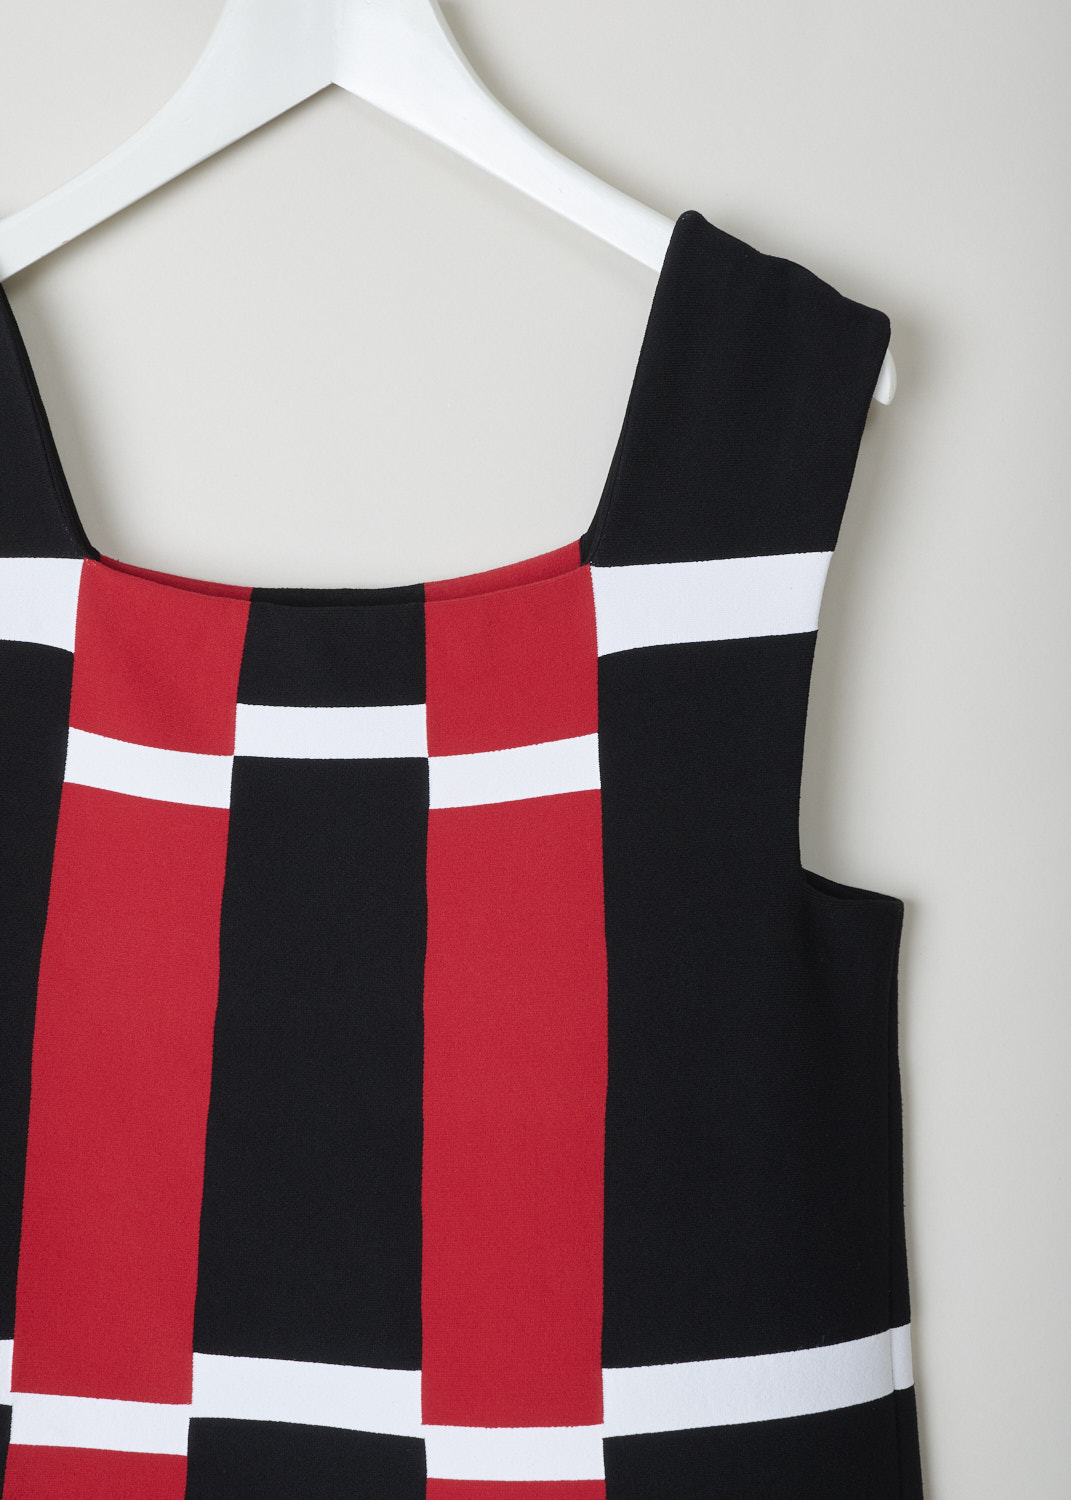 AlaÃ¯a, Mid-length a-line dress in black red and white, 7E9RI18RM327_CM93, print, detail, A Knitted knee-length dress in sixties style, which is reinforced by the tri-colour combination being the black white and red. Elegant, straight neckline, with a sleeveless and slip-on design. 